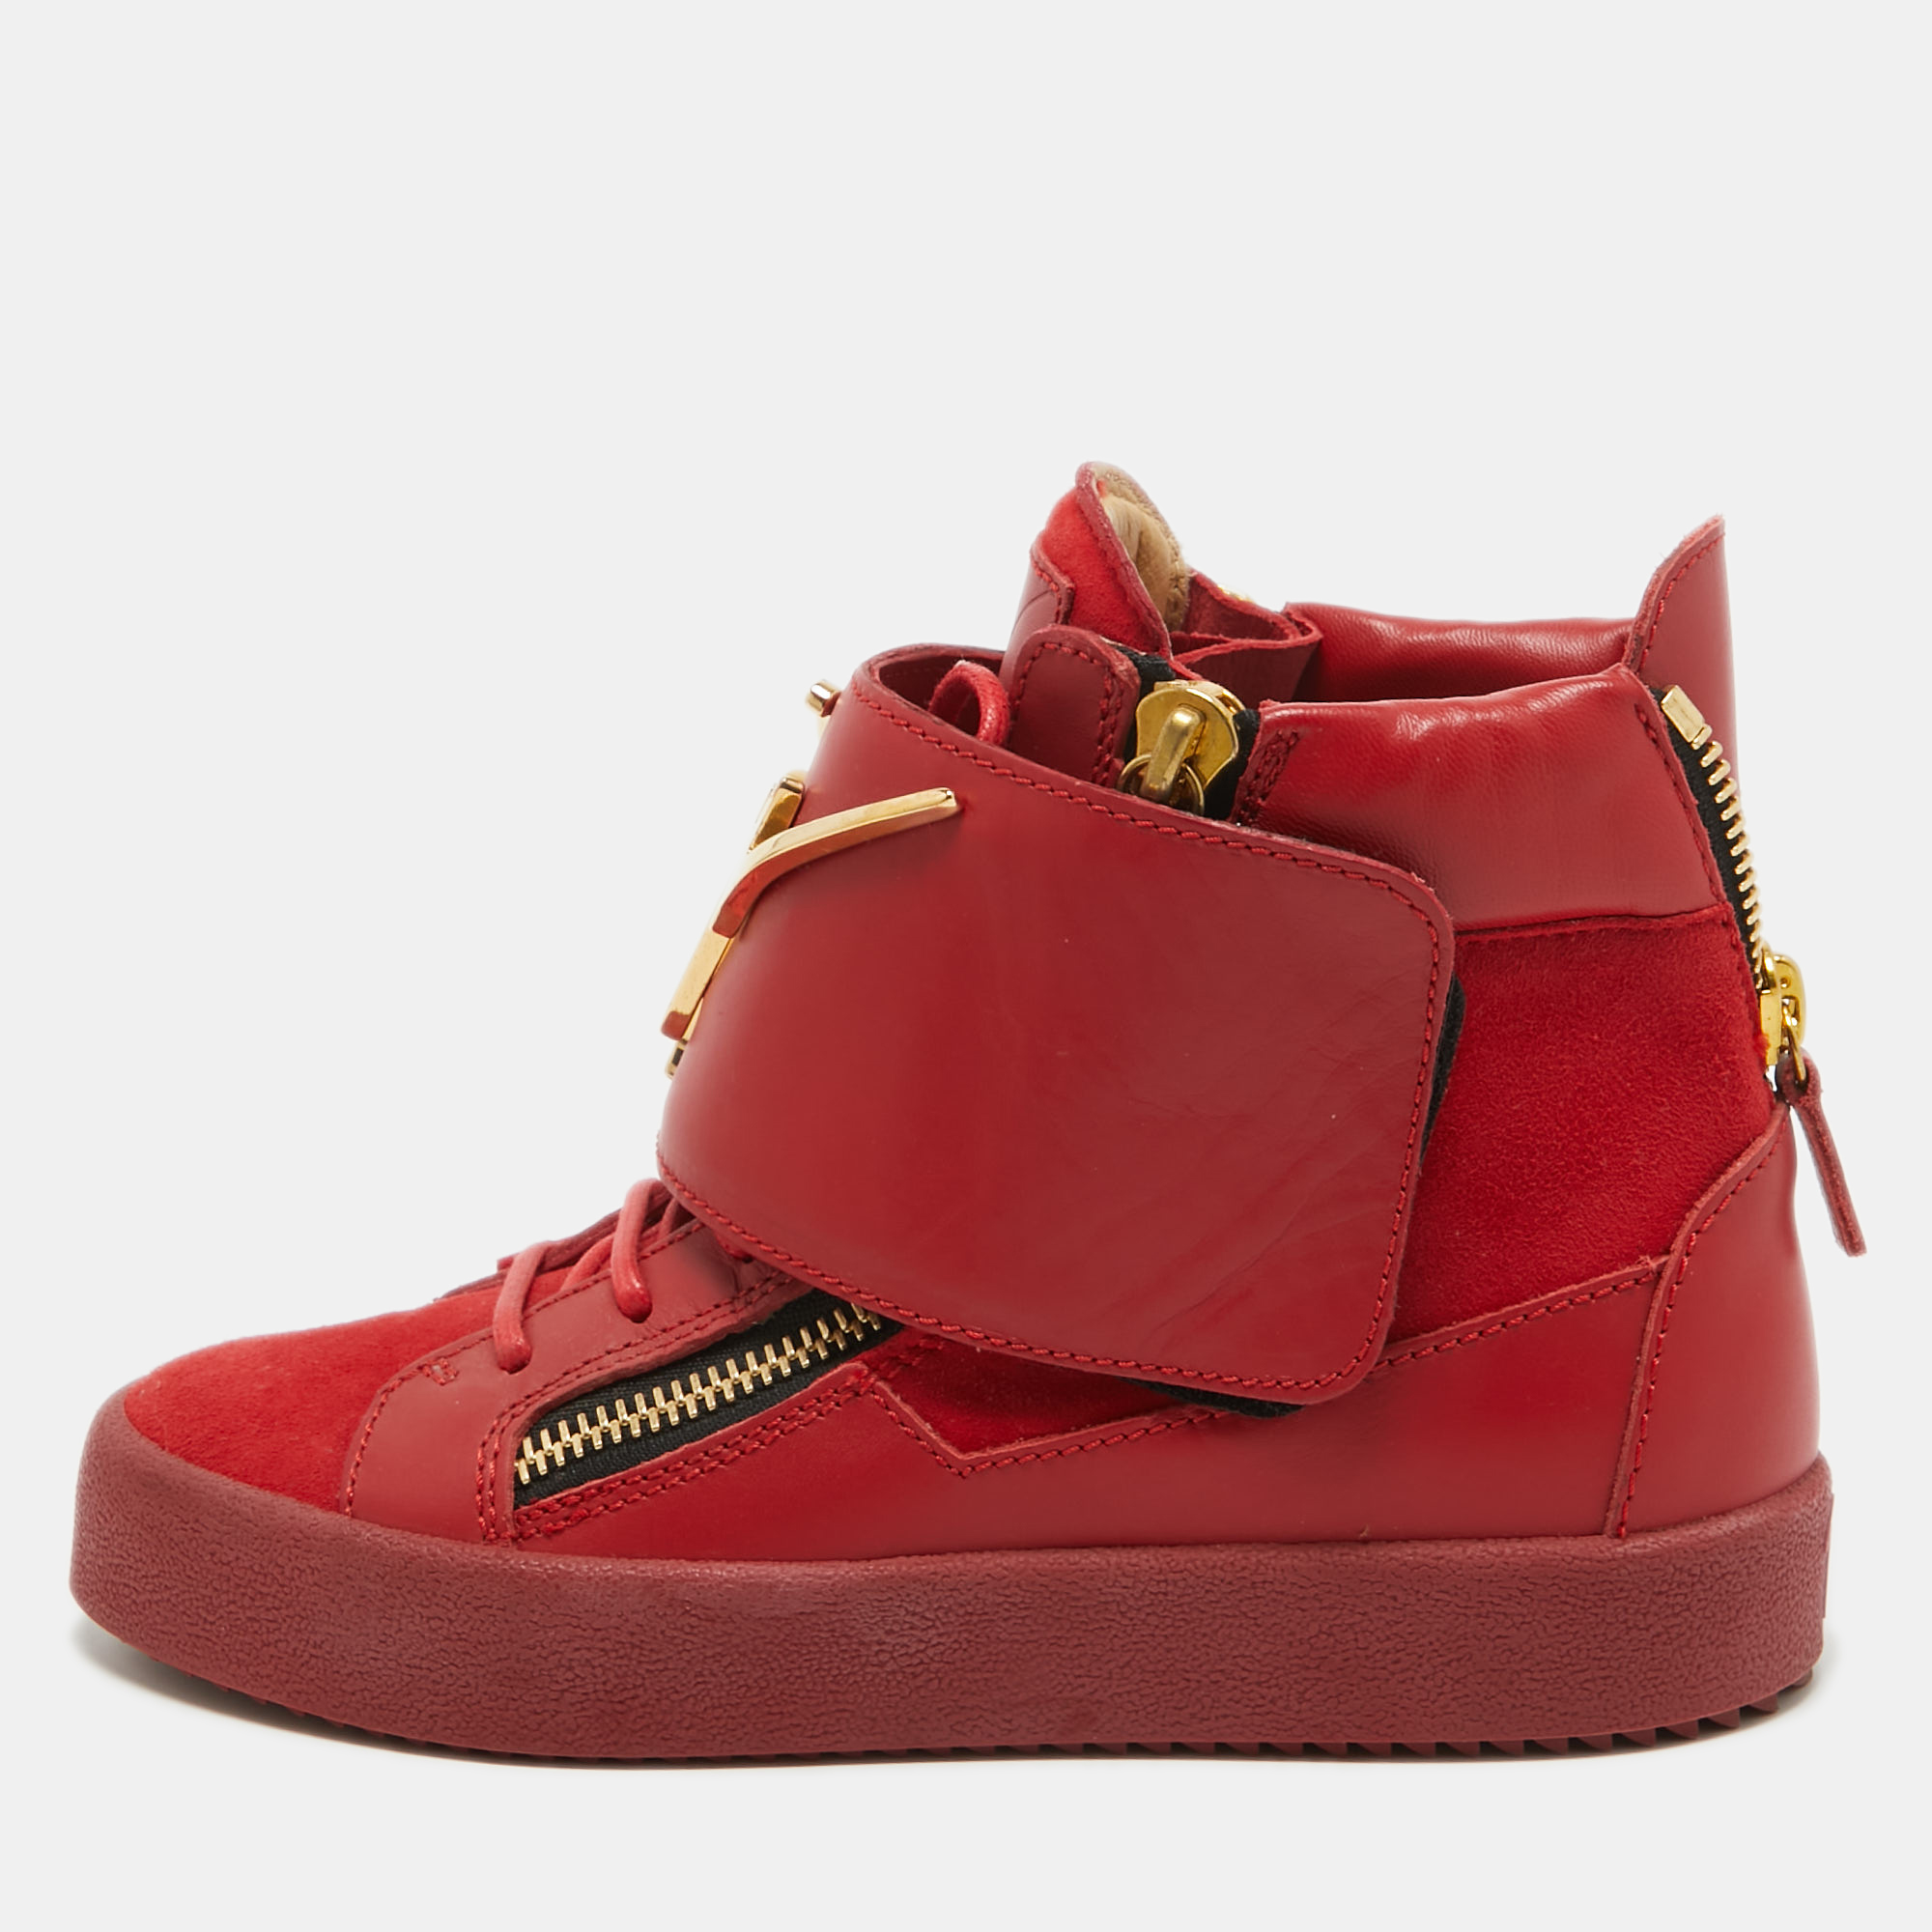 These high top sneakers from Giuseppe Zanotti are astoundingly beautiful. They have been crafted from red suede and leather and styled with round toes lace ups on the vamps gold tone logo detailed wide velcro straps double zippers on the sides and single zippers on the heel counters. Comfortable leather lined insoles and durable rubber soles complete this fabulous pair.